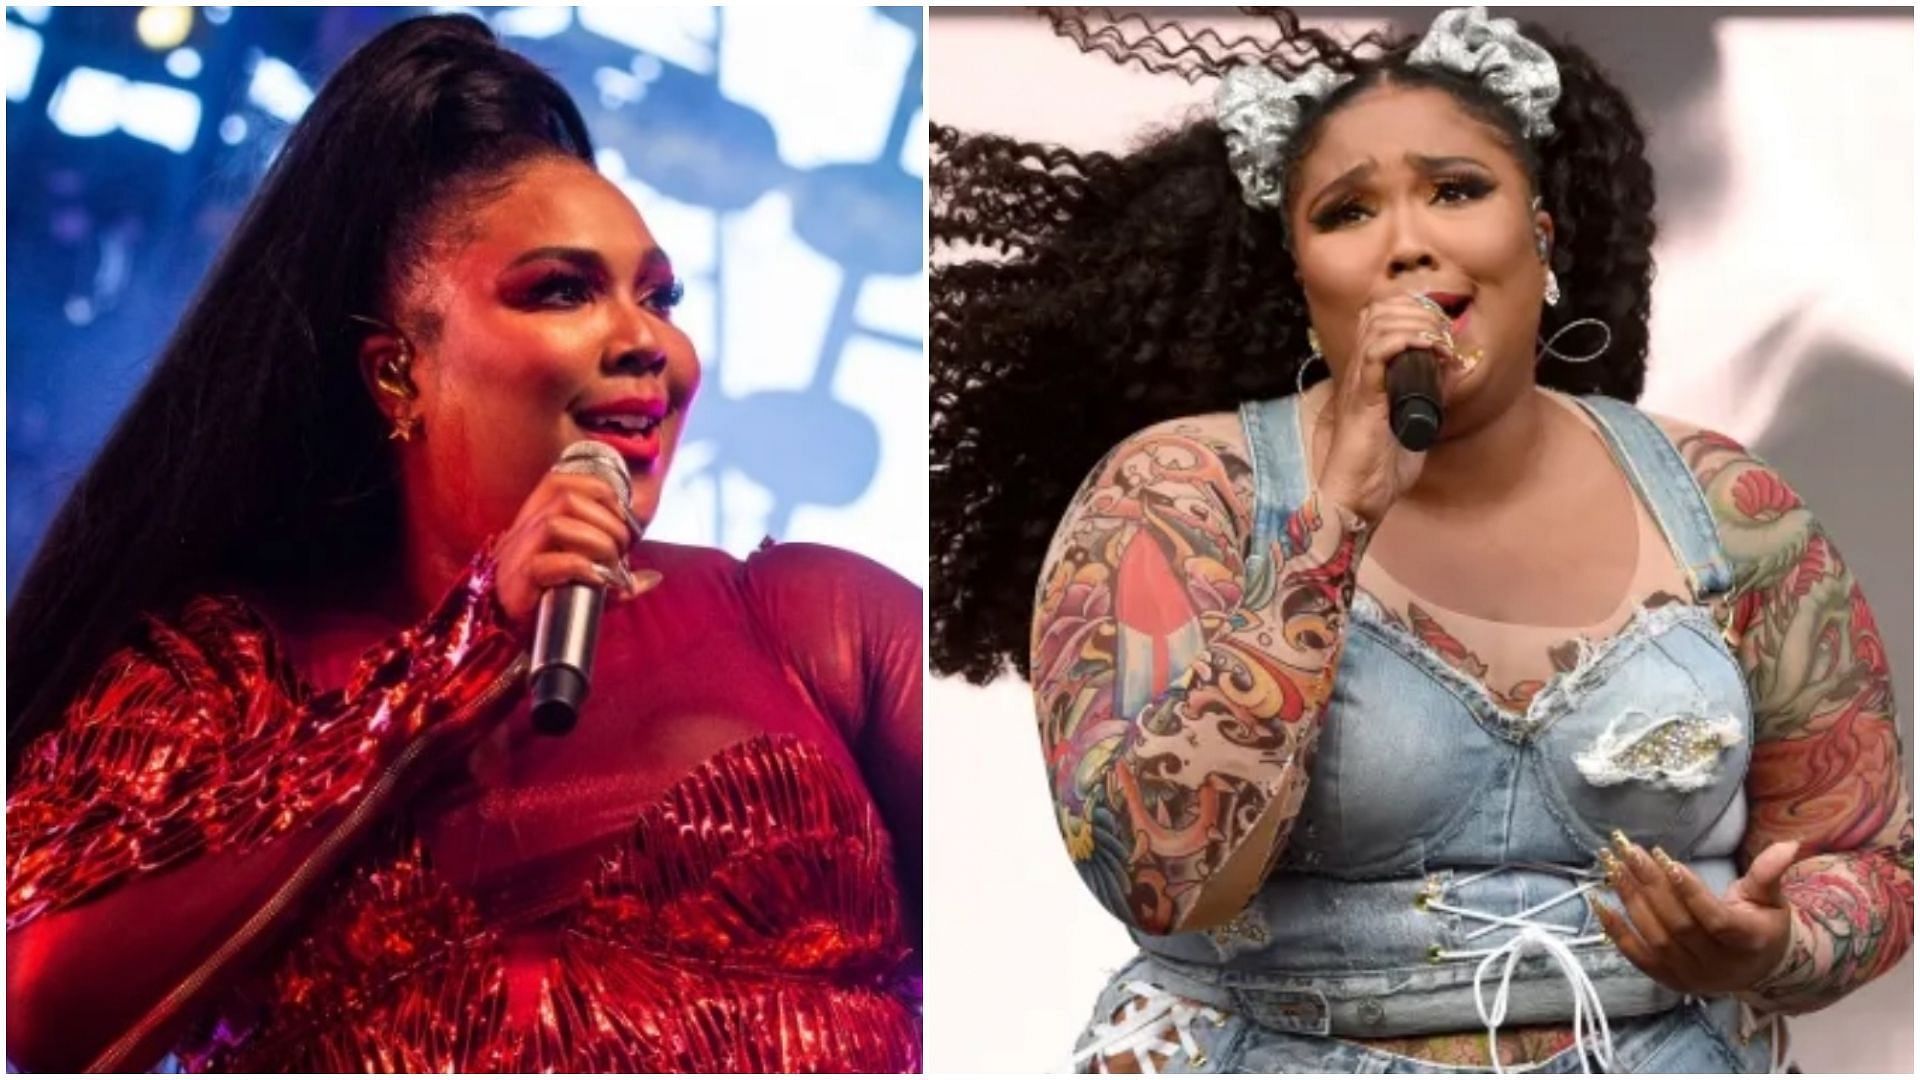 Lizzo North American Tour 2023 Tickets, presale, where to buy, dates